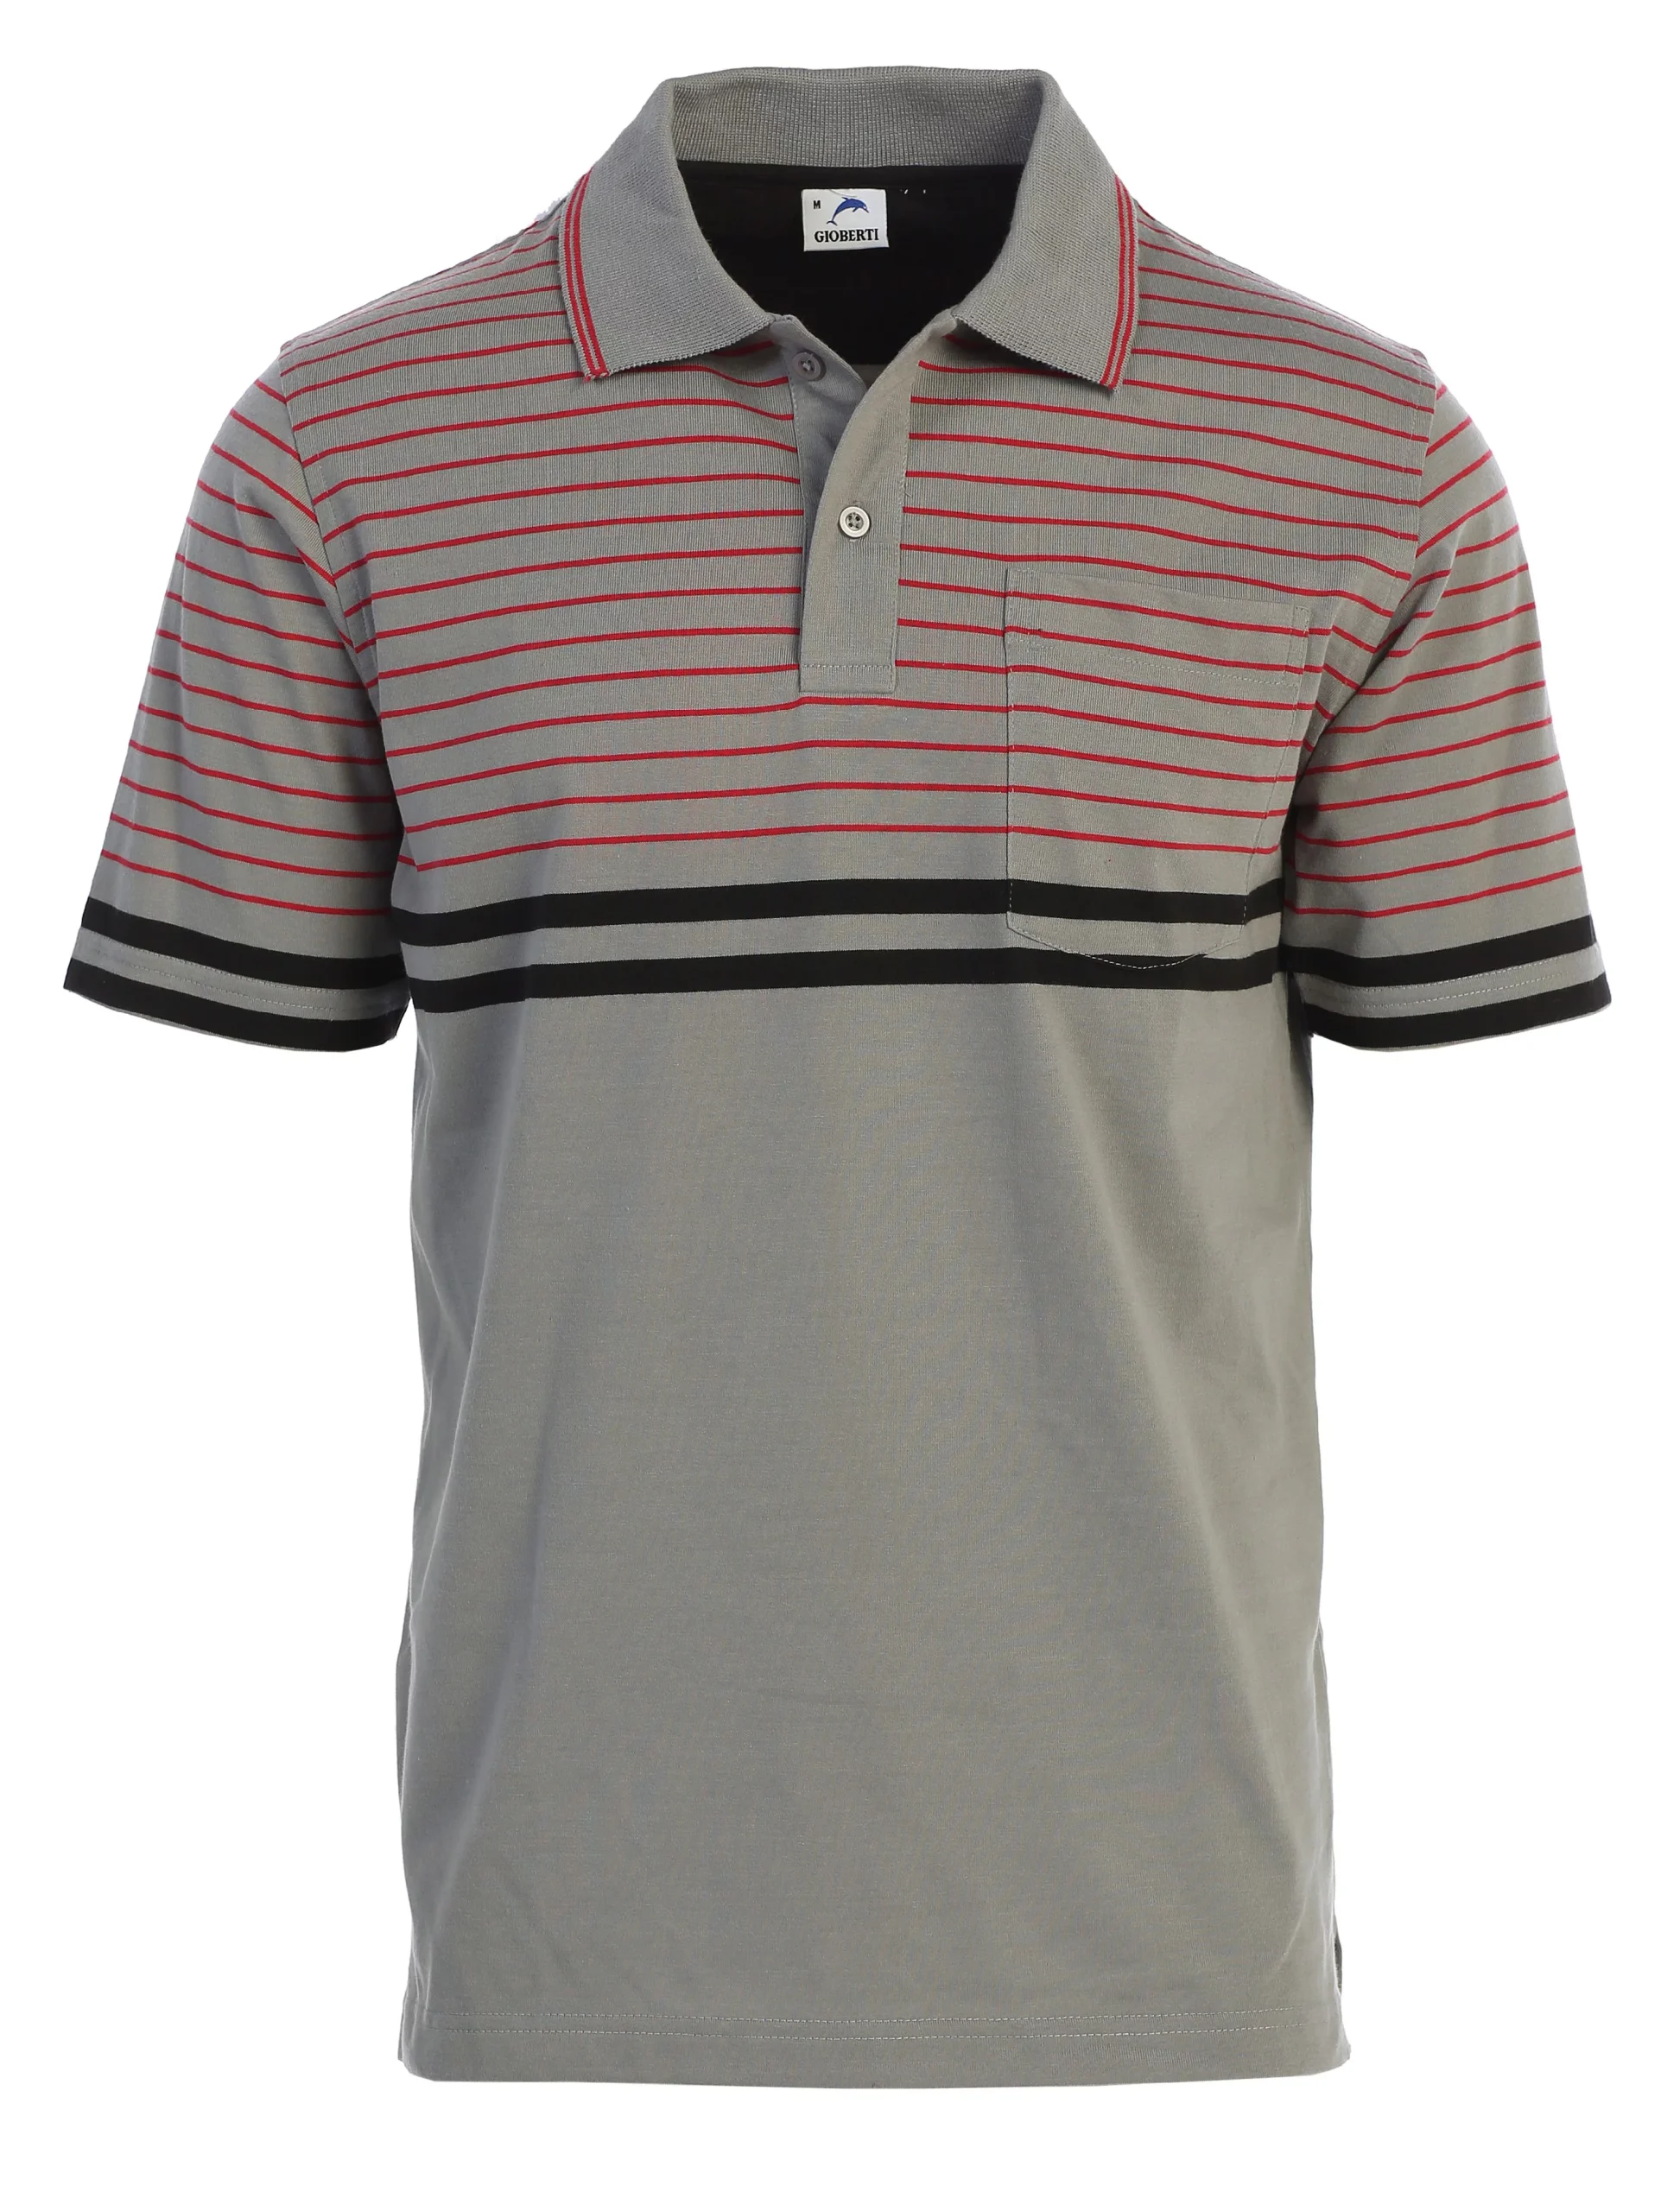 Mens Double Striped Polo Shirt Supplier In Cyprus